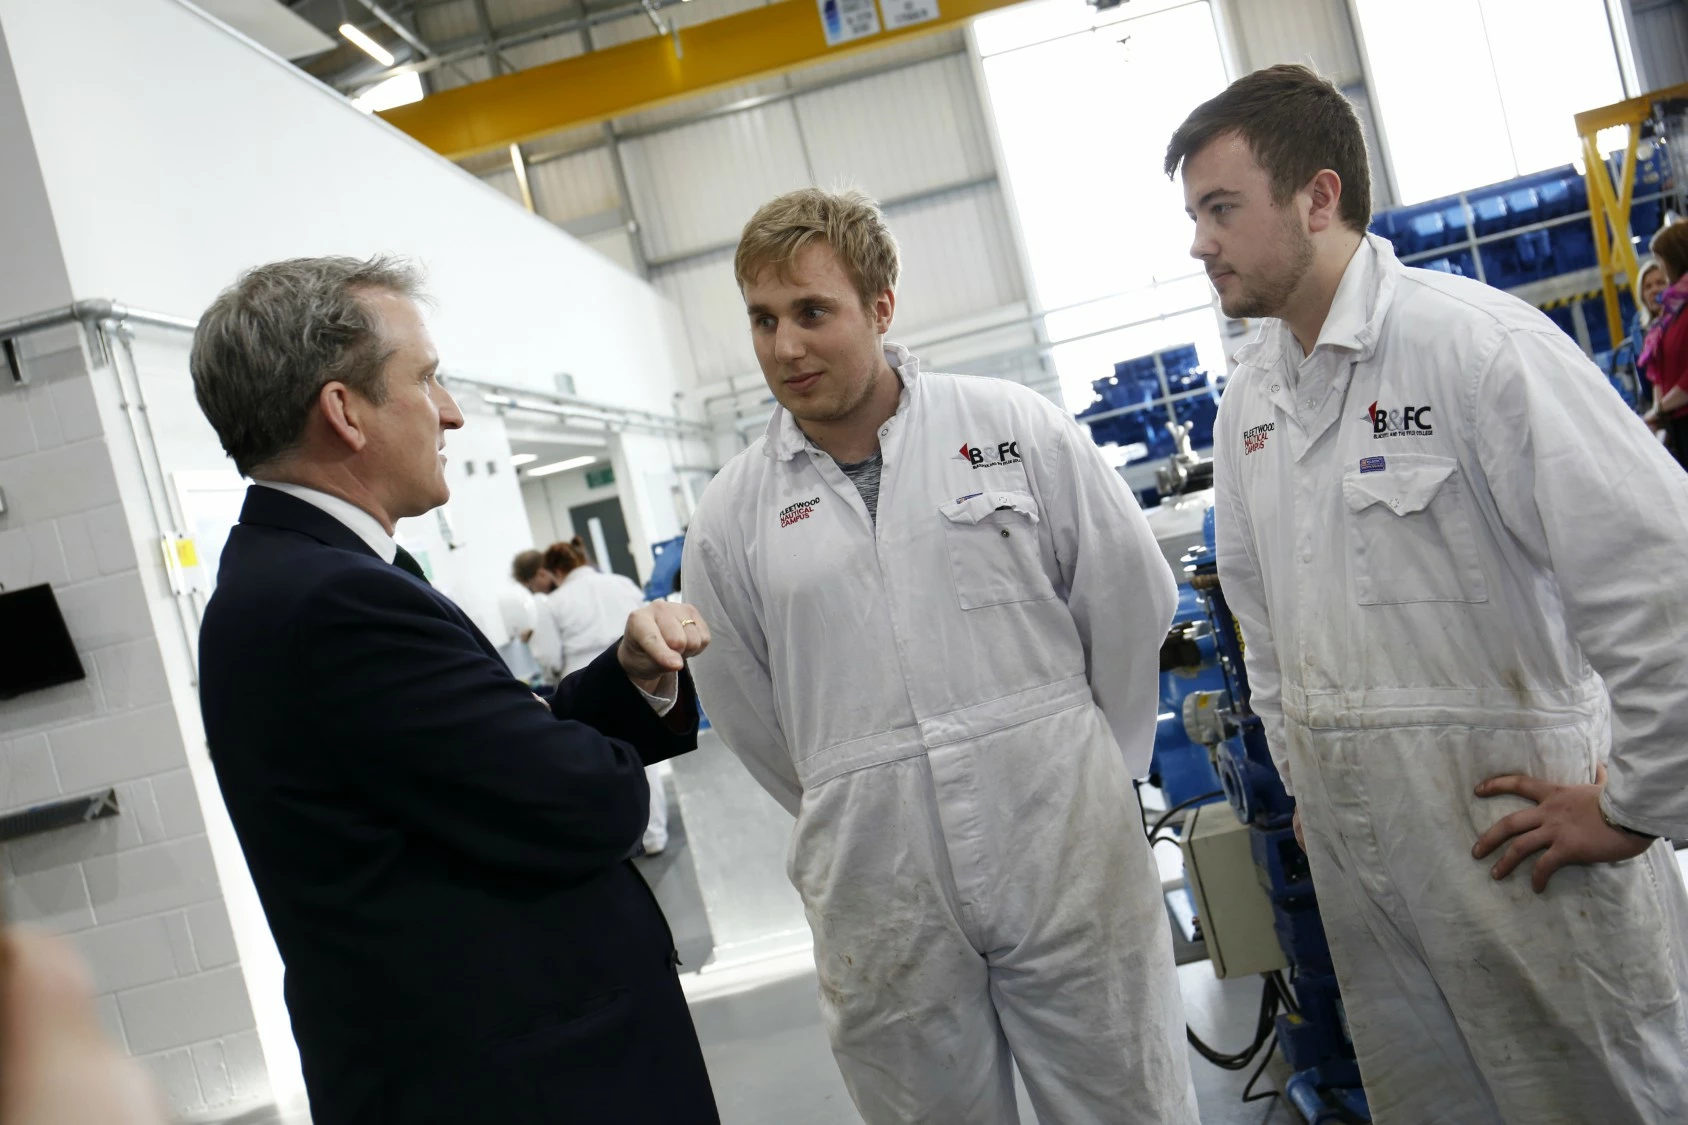 Secretary of State for Education, the Rt Hon Damian Hinds MP, visits Blackpool and The Fylde College